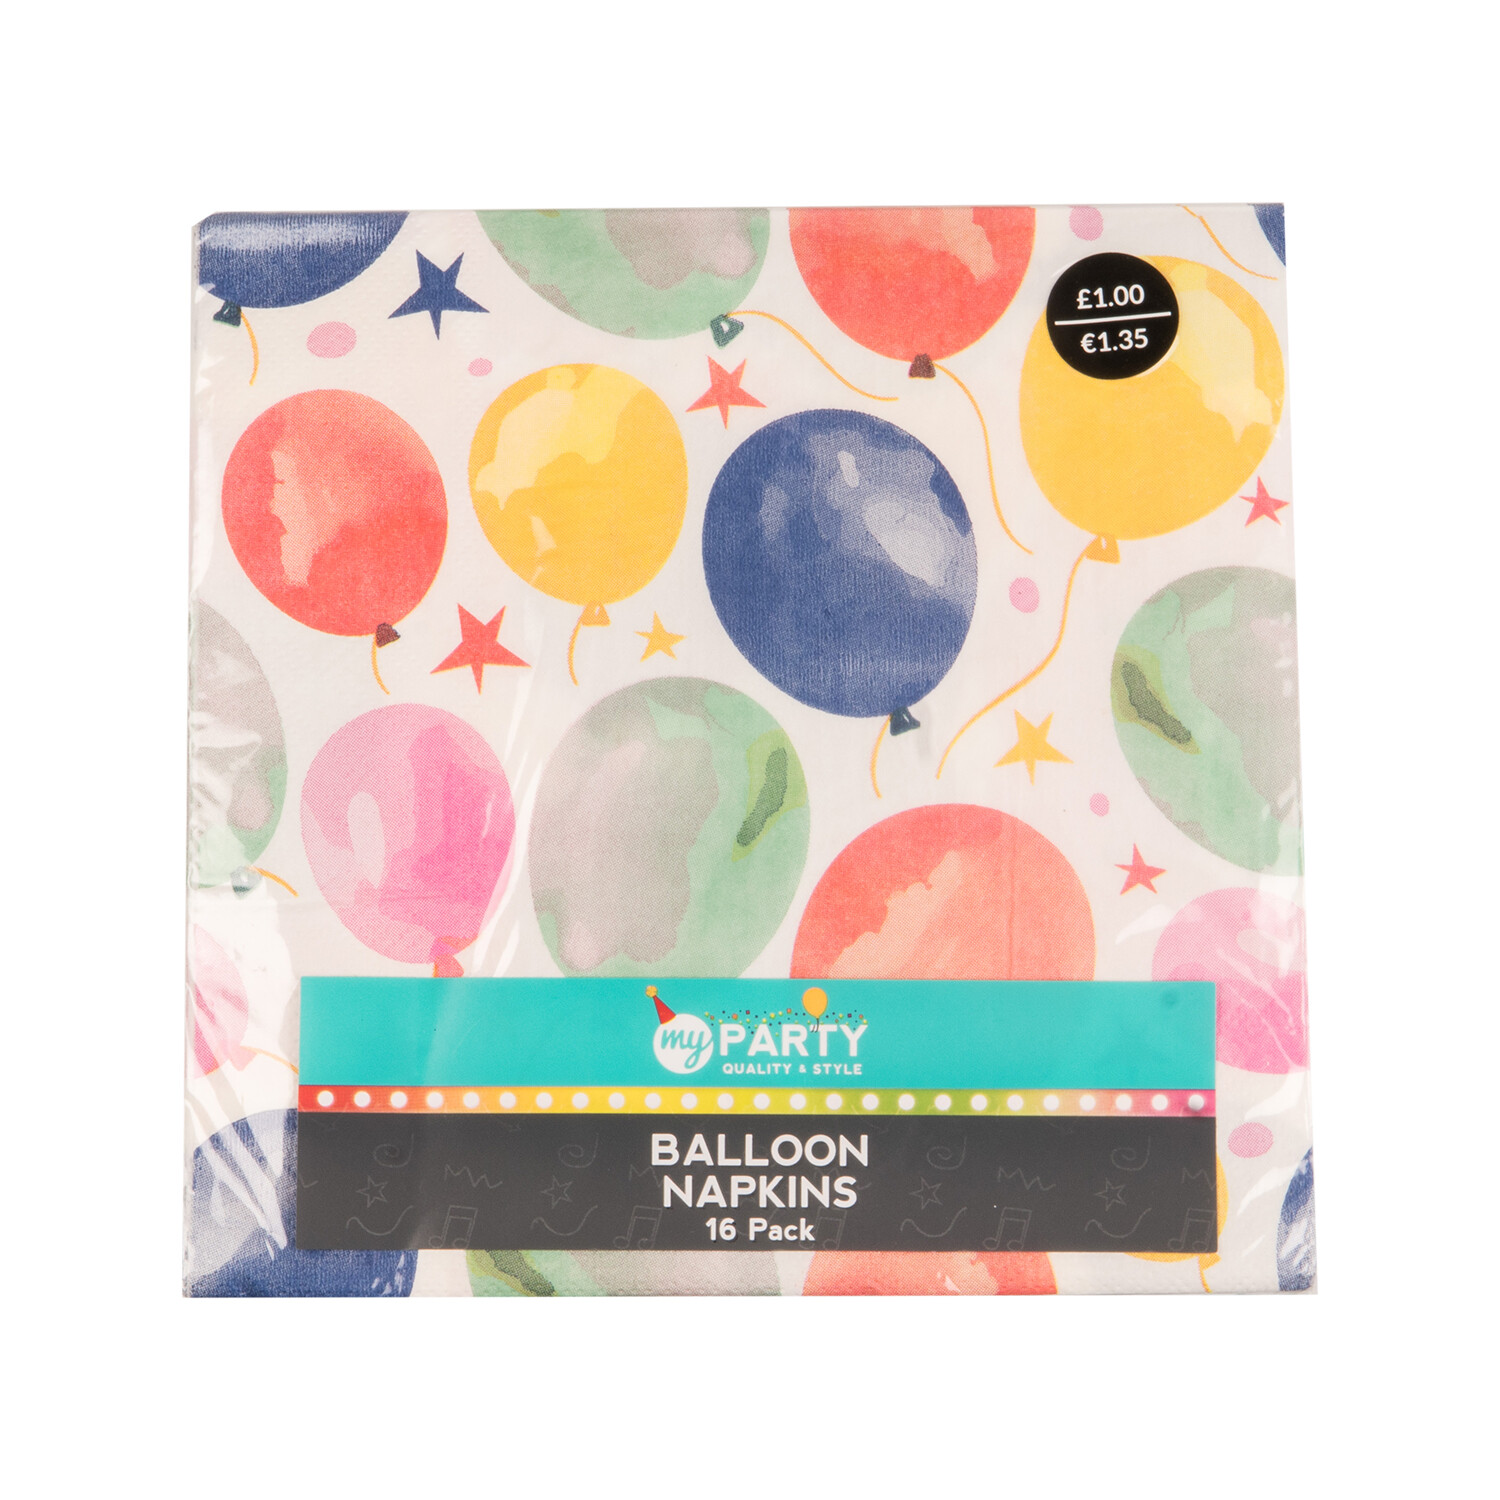 My Party Balloon Napkins 16 Pack Image